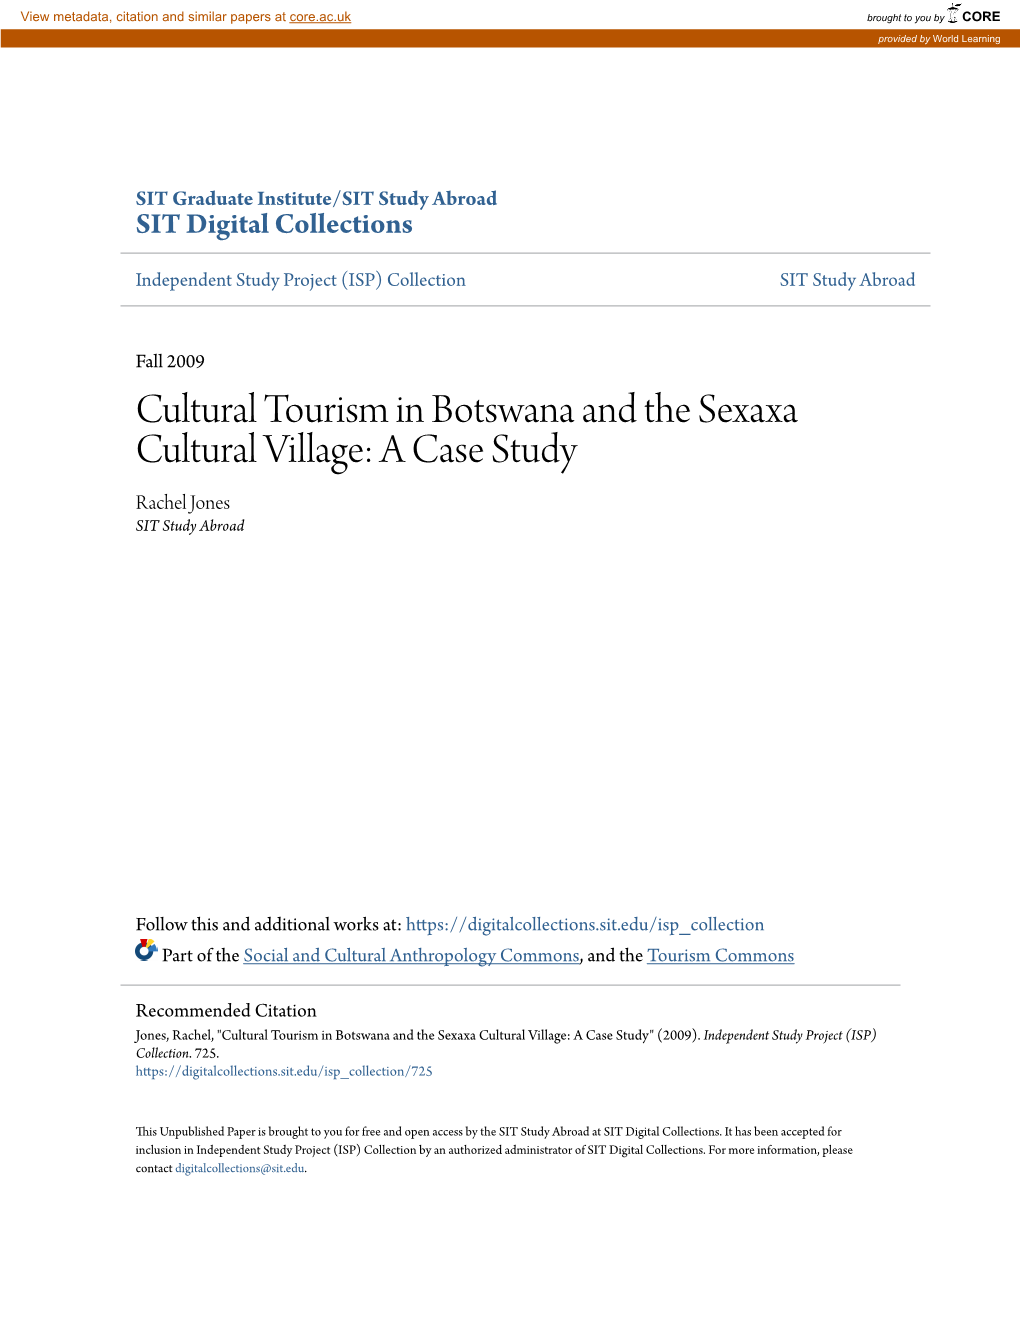 Cultural Tourism in Botswana and the Sexaxa Cultural Village: a Case Study Rachel Jones SIT Study Abroad